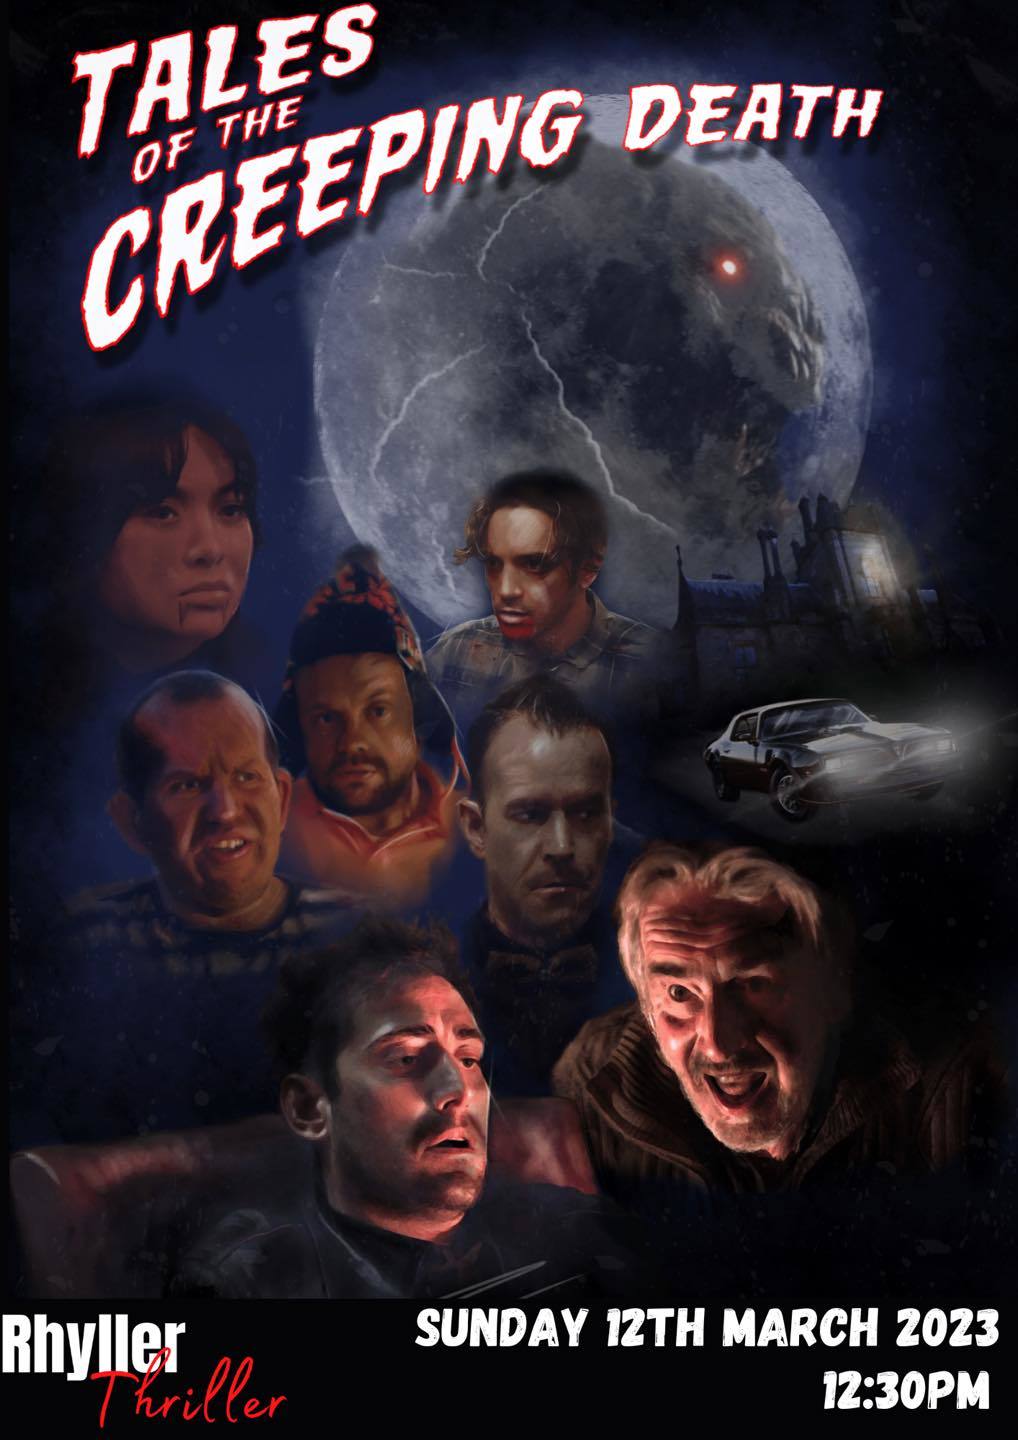 Tales of the Creeping Death will be screened at Rhyller Thriller.